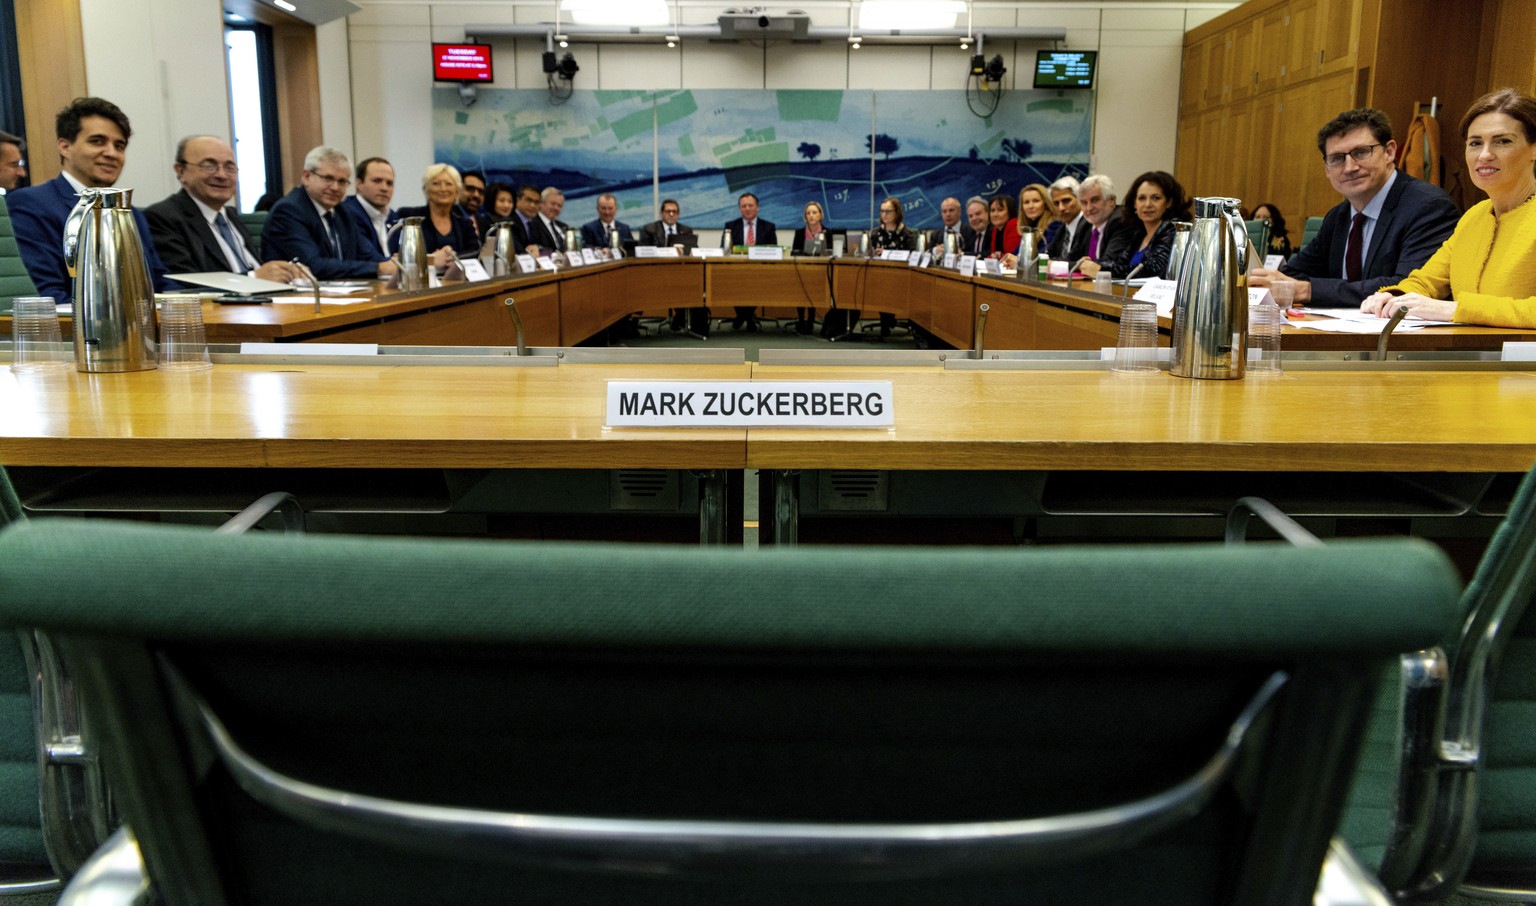 This photo posed for the photographer on Tuesday Nov. 27, 2018 and made available by the House of Commons shows the International Grand Committee with representation from 9 Parliaments and Mark Zucker ...